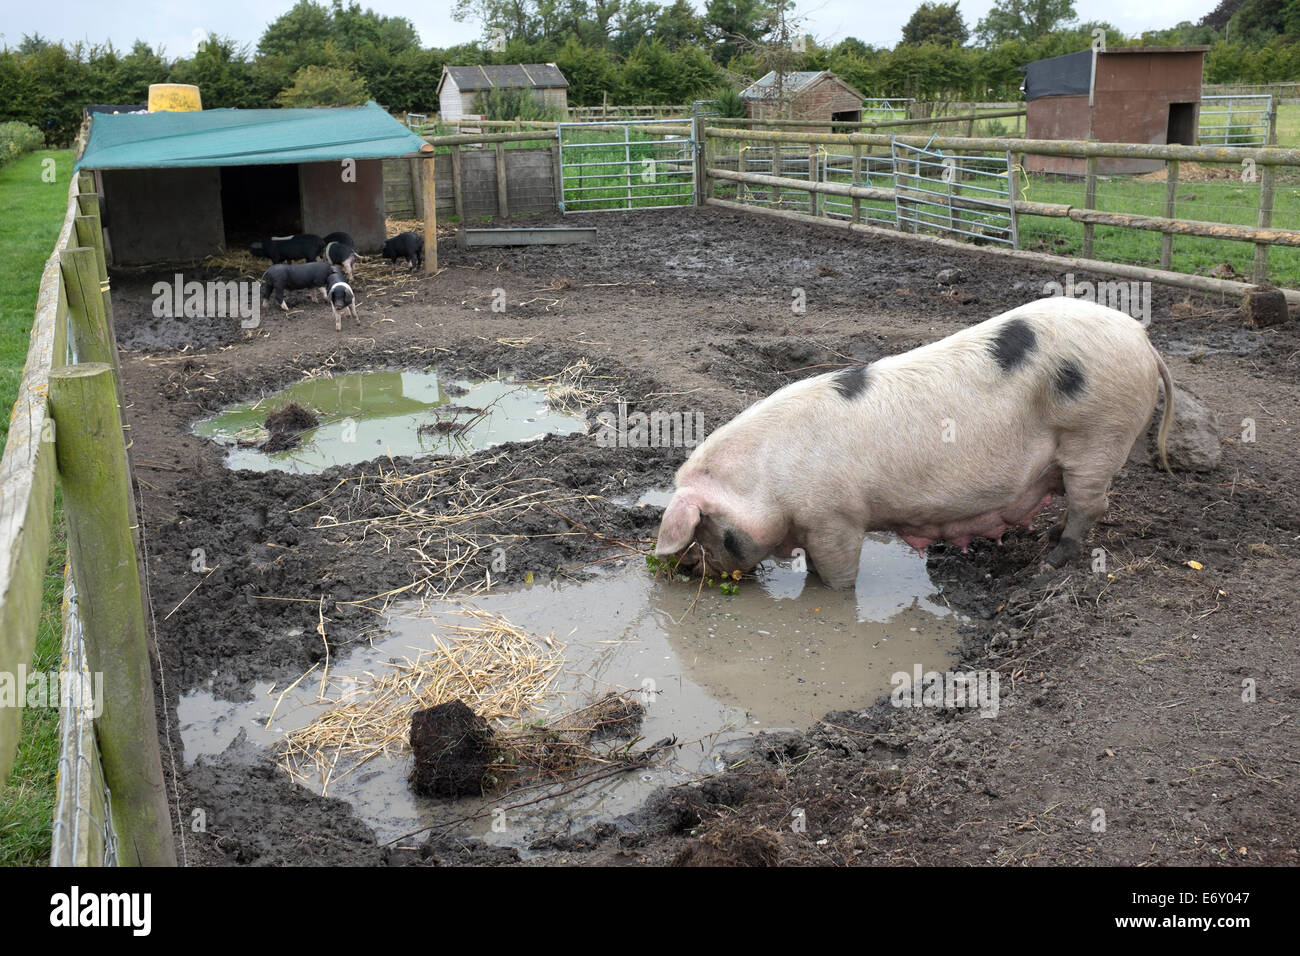 Female Pig or Sow drinking water in sty Stock Photo